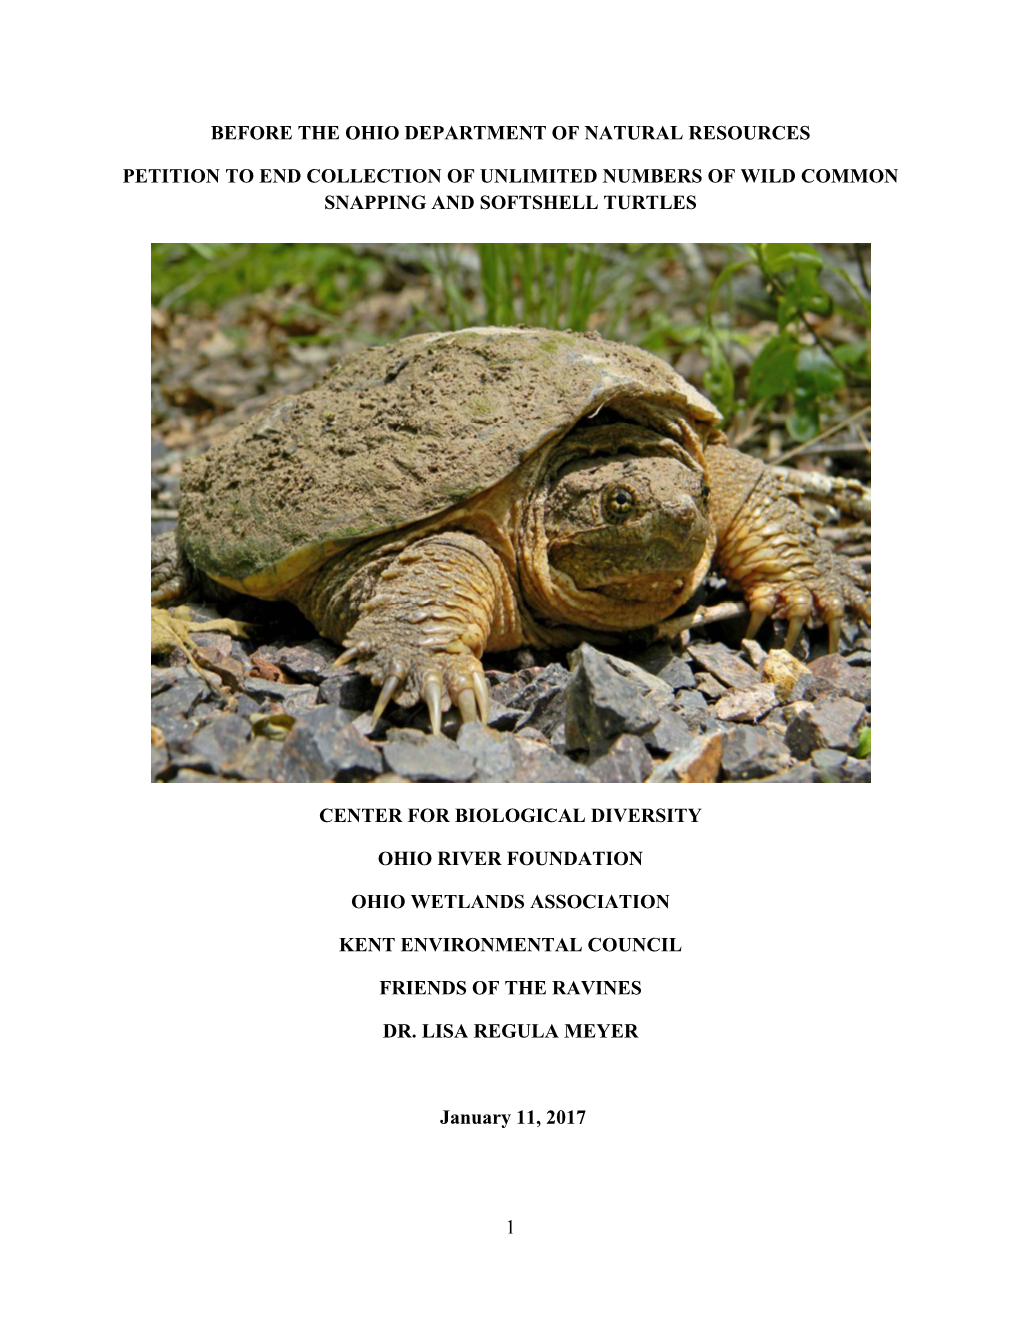 Petition to End Collection of Unlimited Numbers of Wild Common Snapping and Softshell Turtles